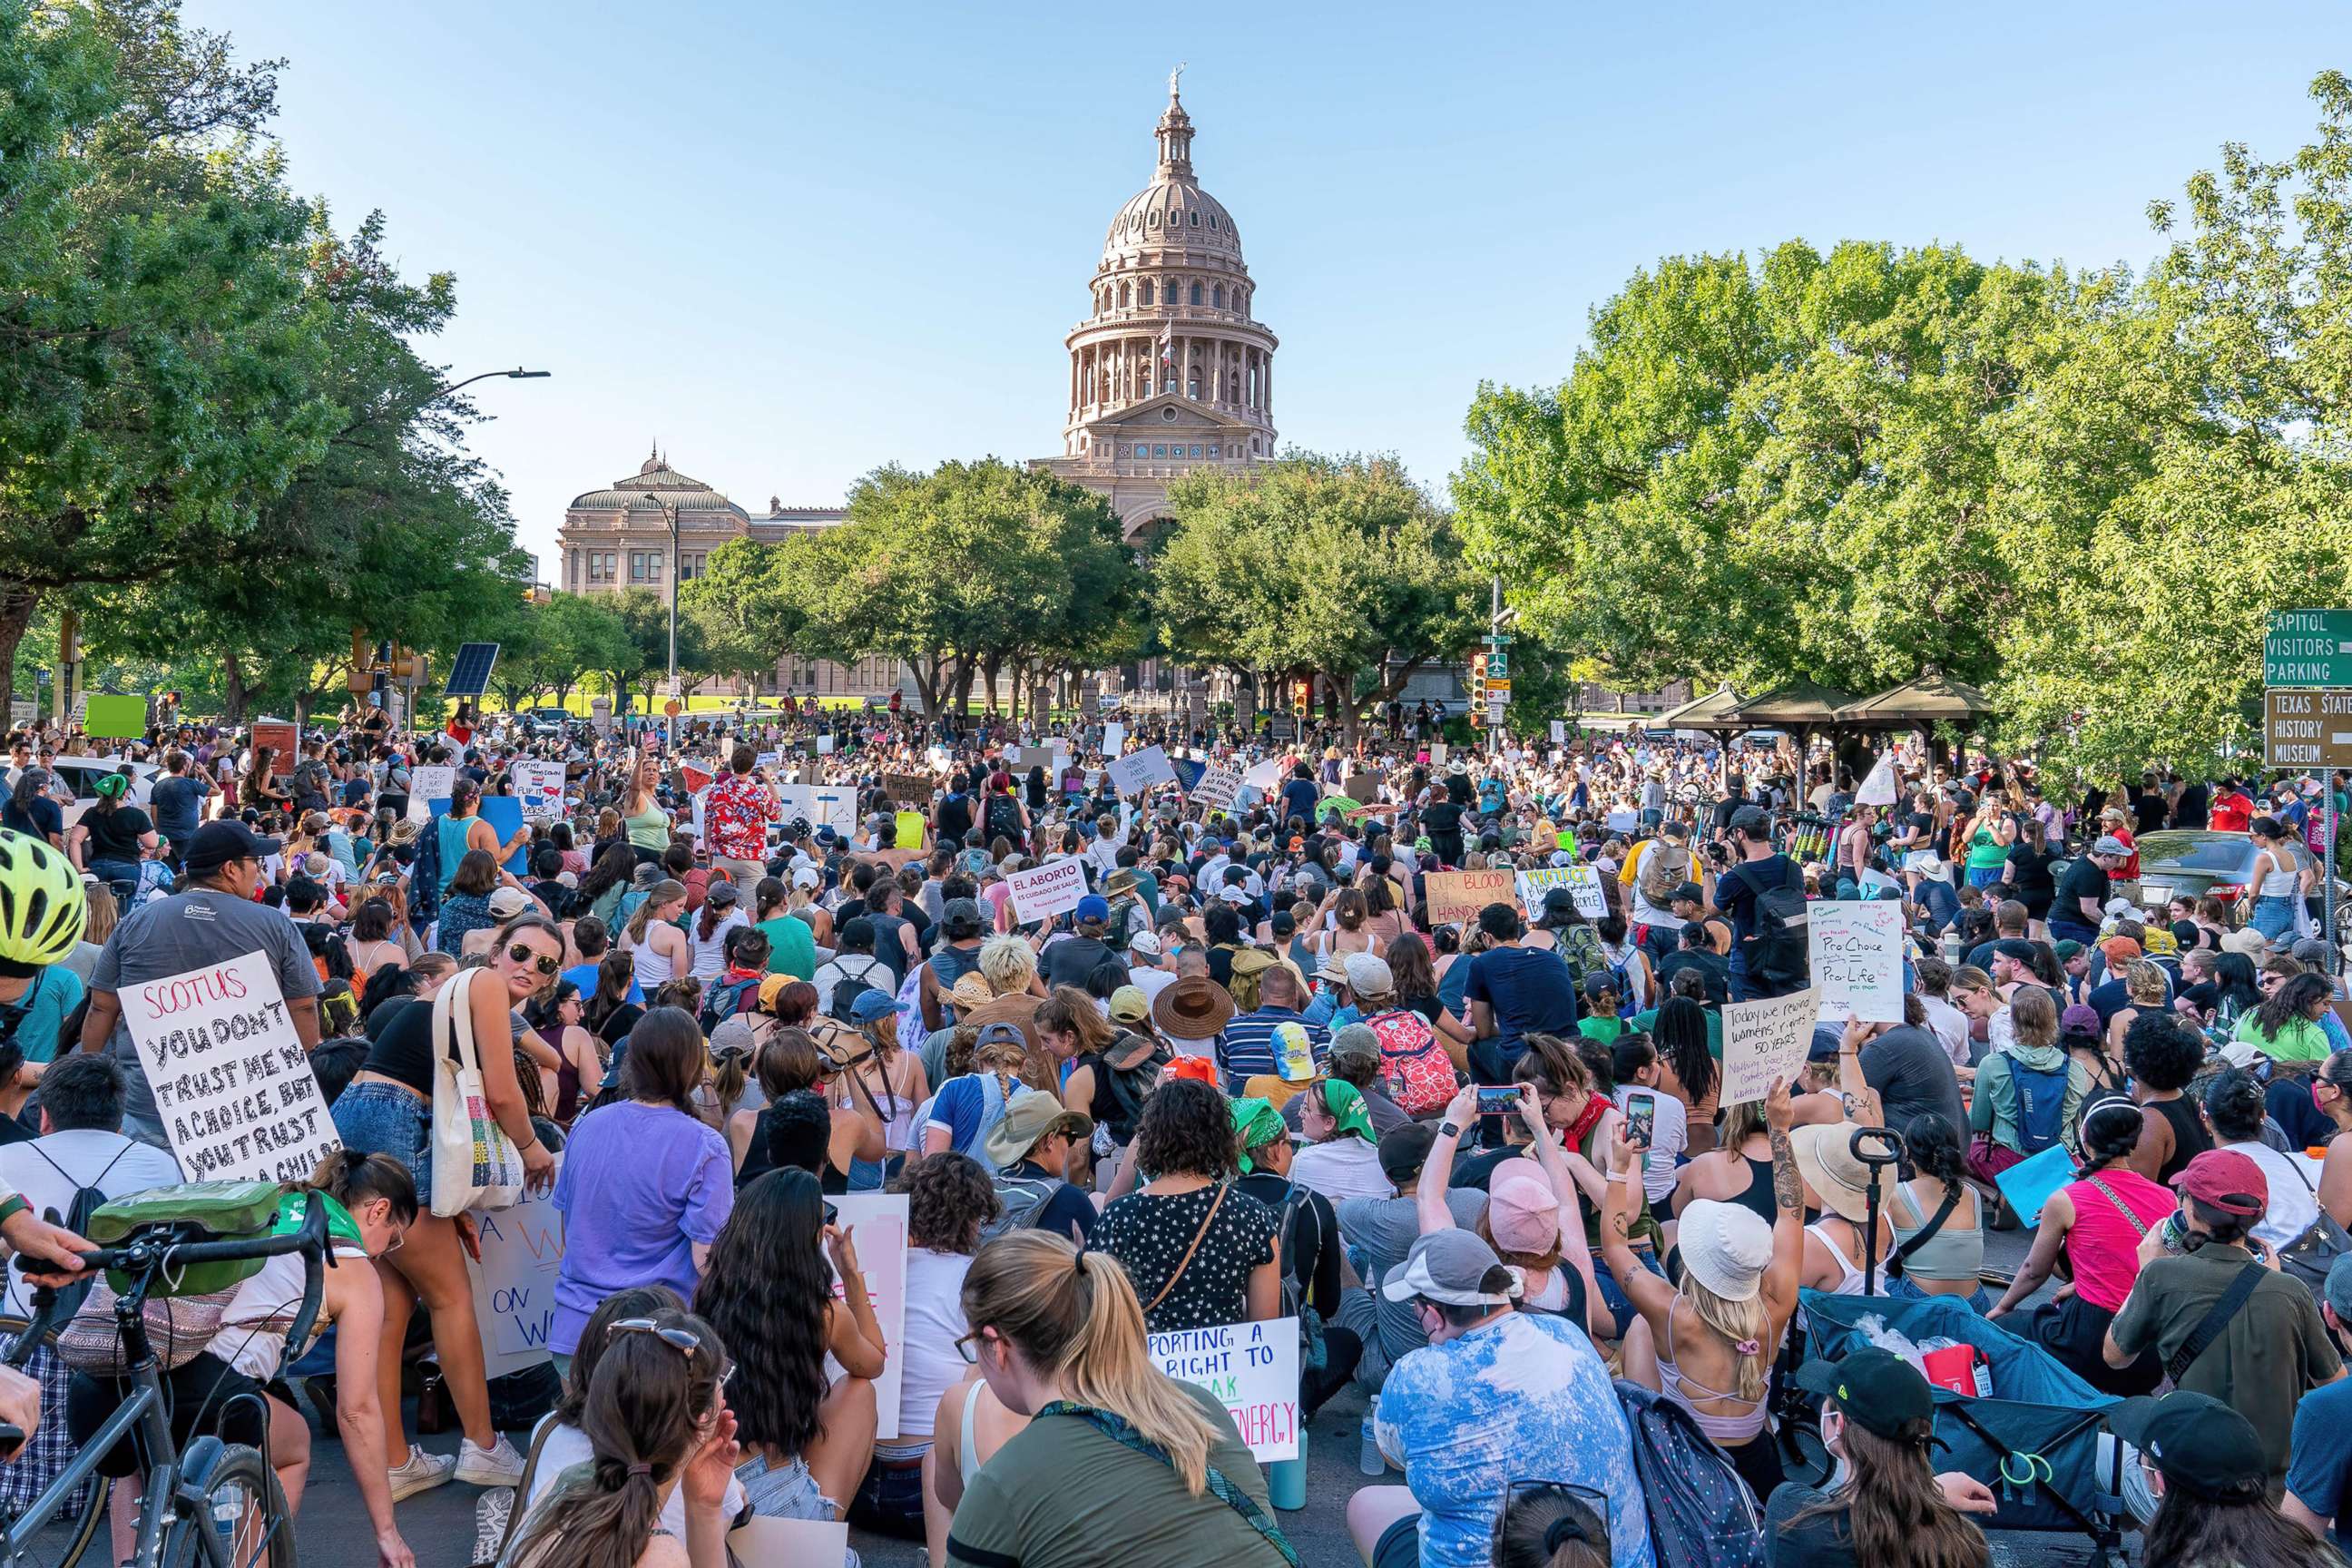 PHOTO: In this June 24, 2022, file photo, abortion rights activists march to the Austin State Capitol after the overturning of Roe Vs. Wade by the US Supreme Court, in Austin, Texas.